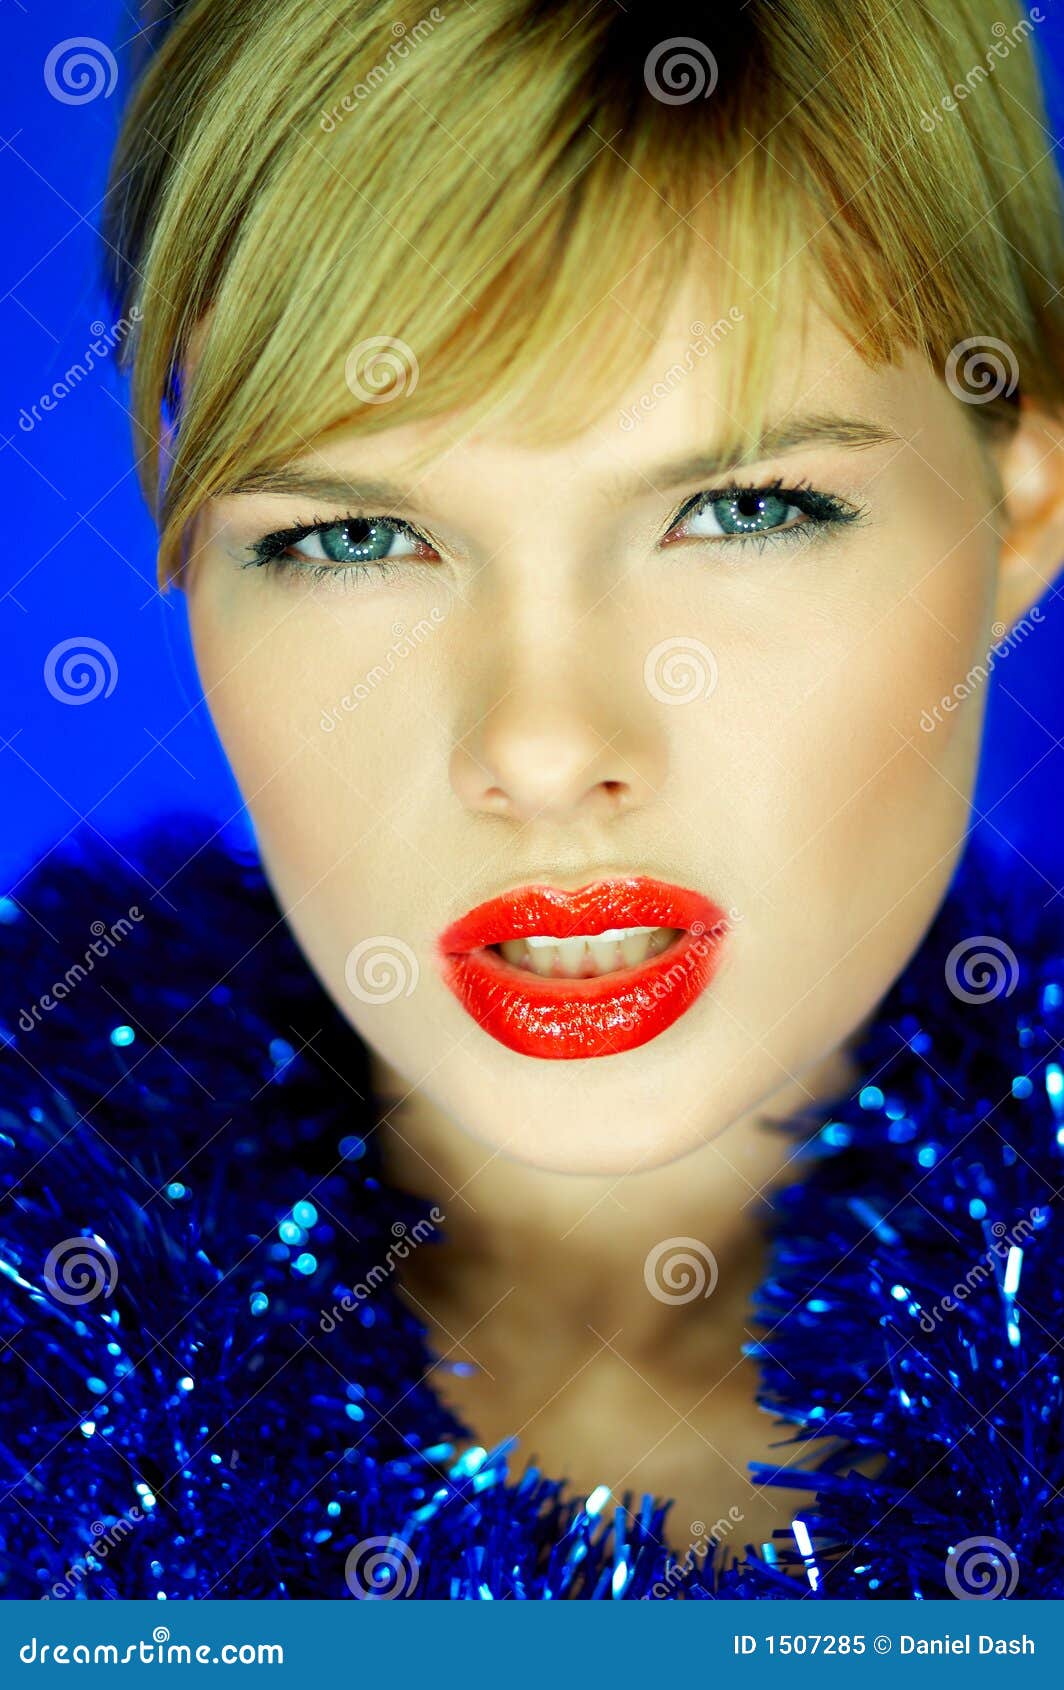 Red Lips 2 stock image. Image of glossy, lipstick, chain - 1507285